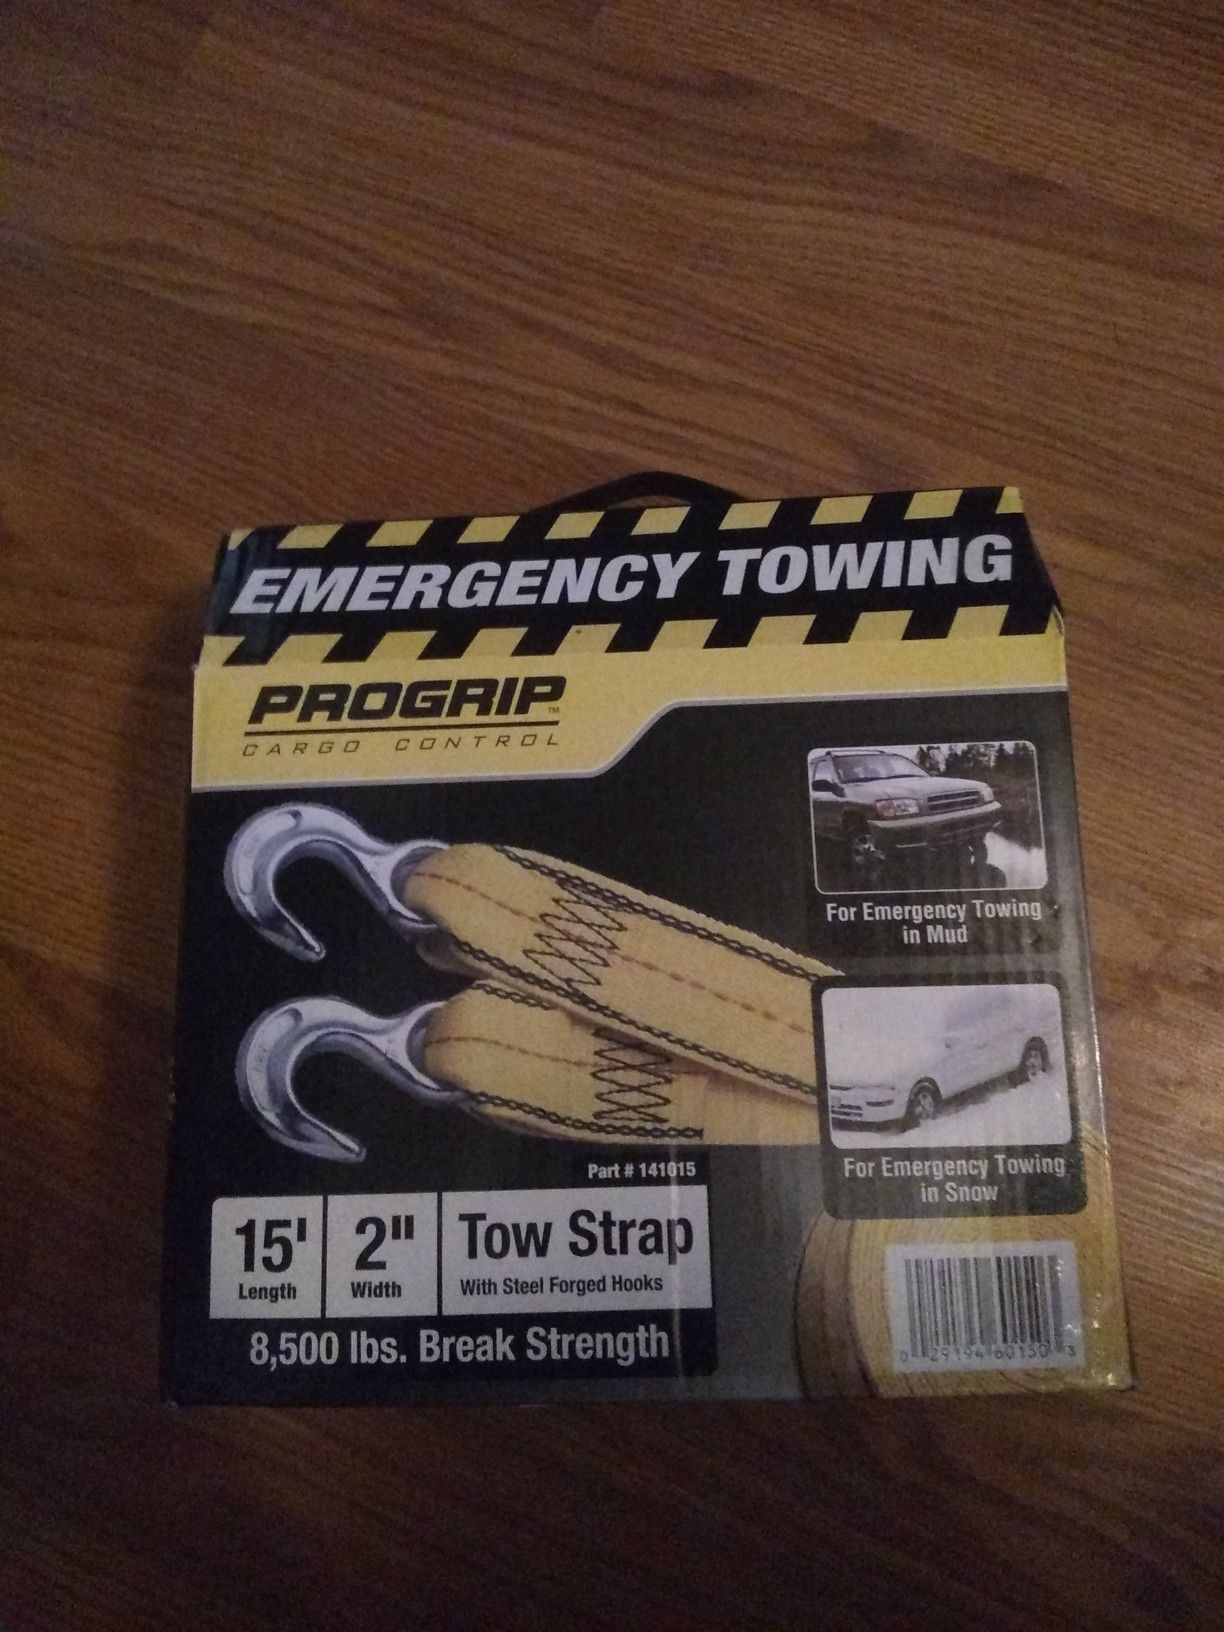 Progrip emergency towing straps